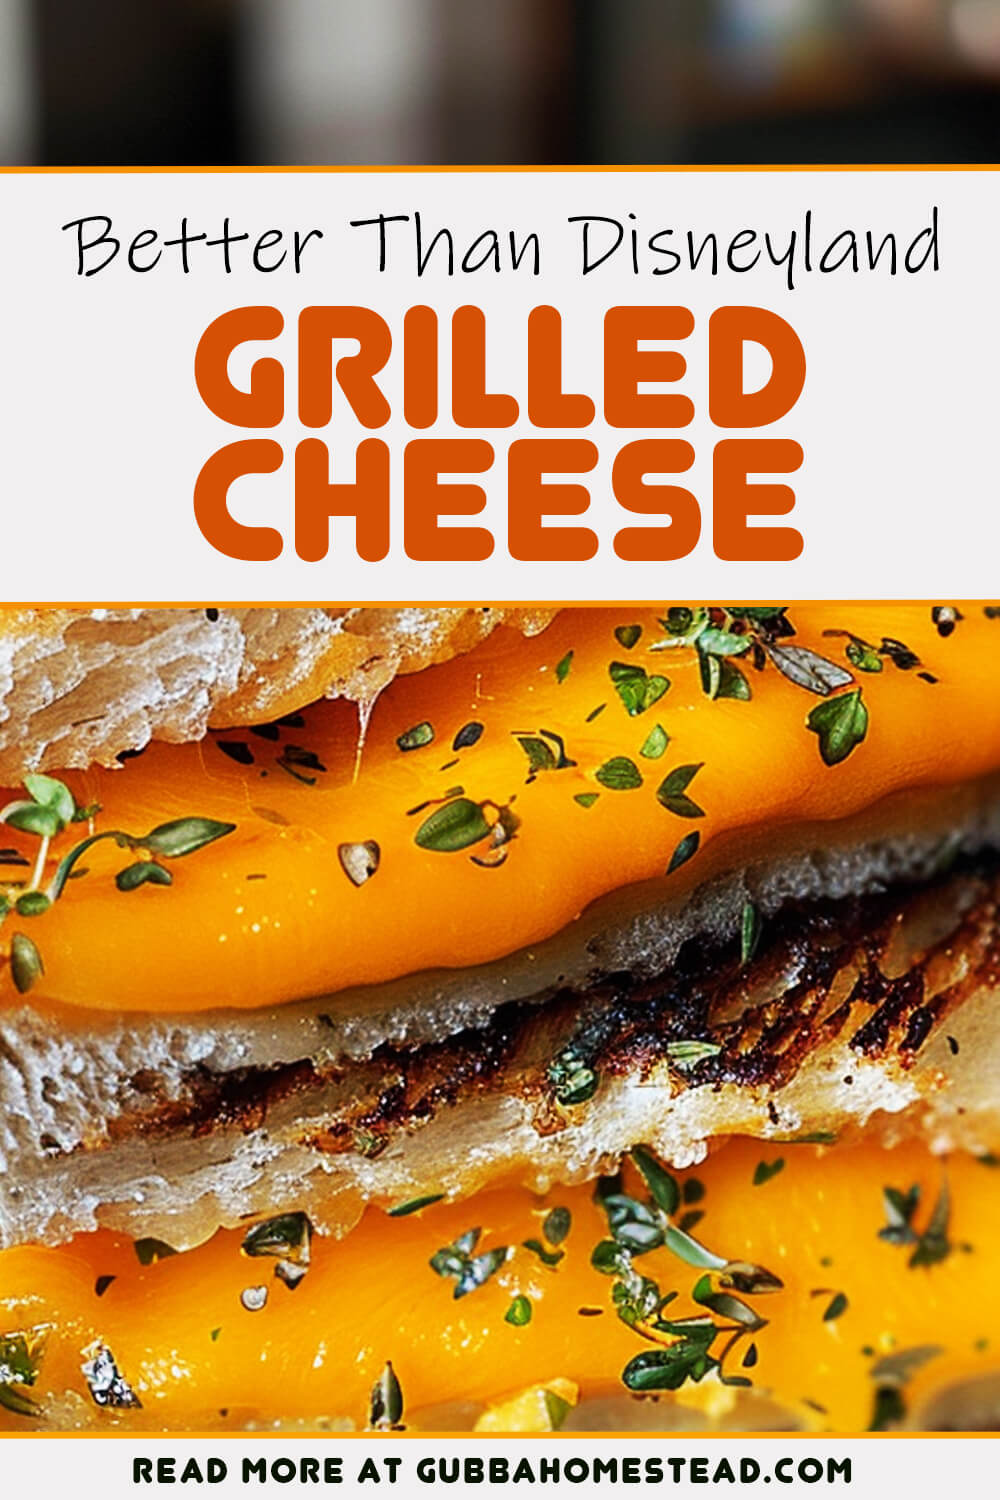 Better Than Disneyland Grilled Cheese